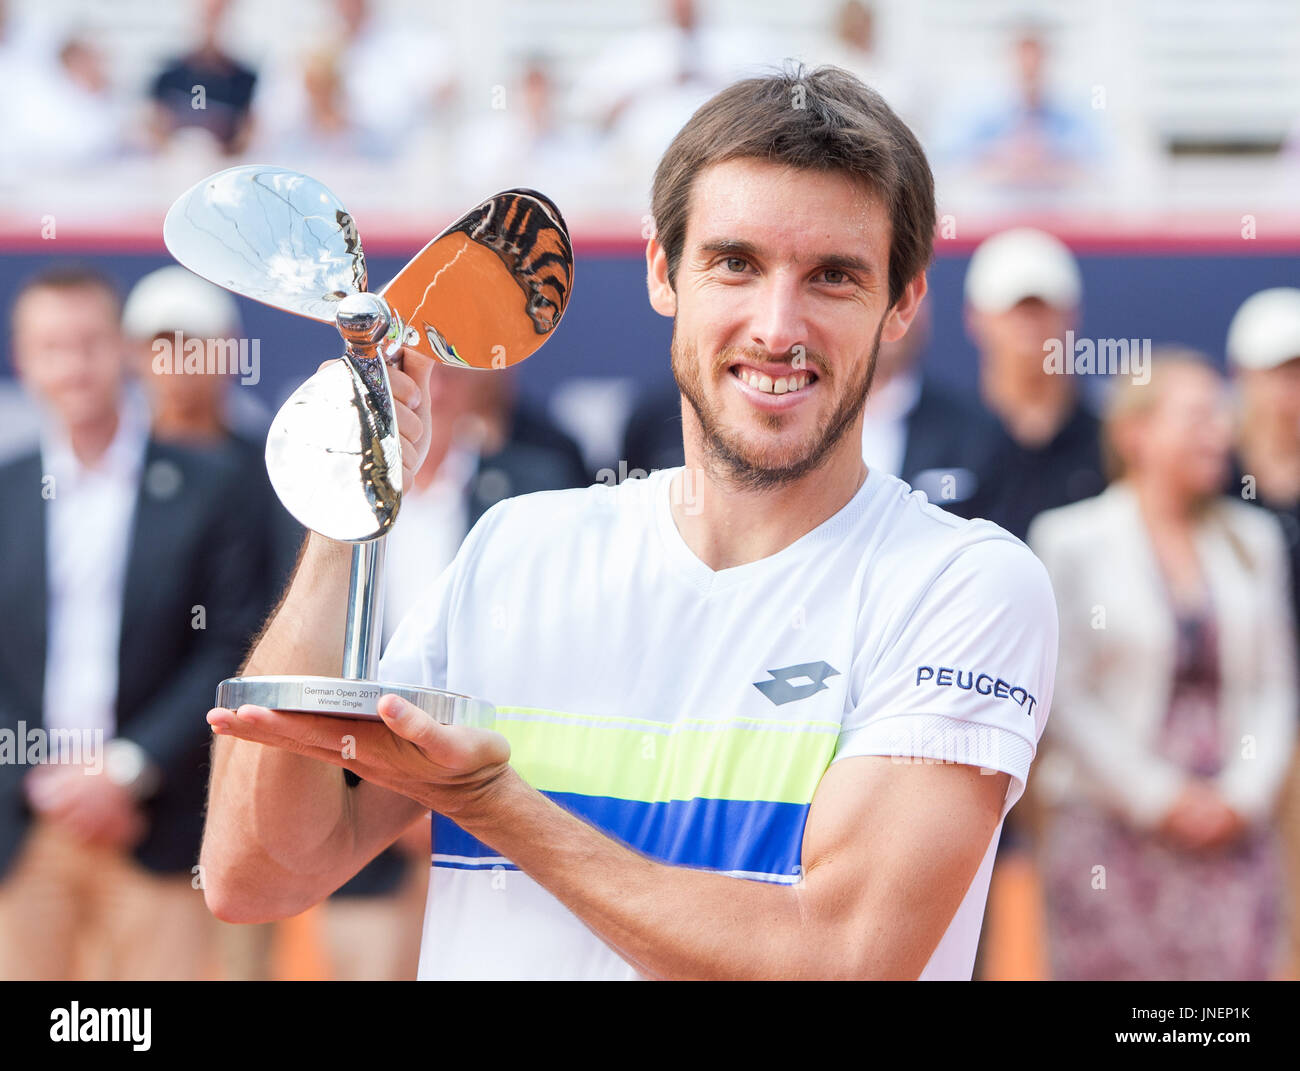 Hamburg, Germany. 30th July, 2017. Leonardo Mayer of Argentina celebrates  his victory over Mayer of Germany with his trophy in the men's singles  final of the Tennis ATP-Tour German Open in Hamburg,